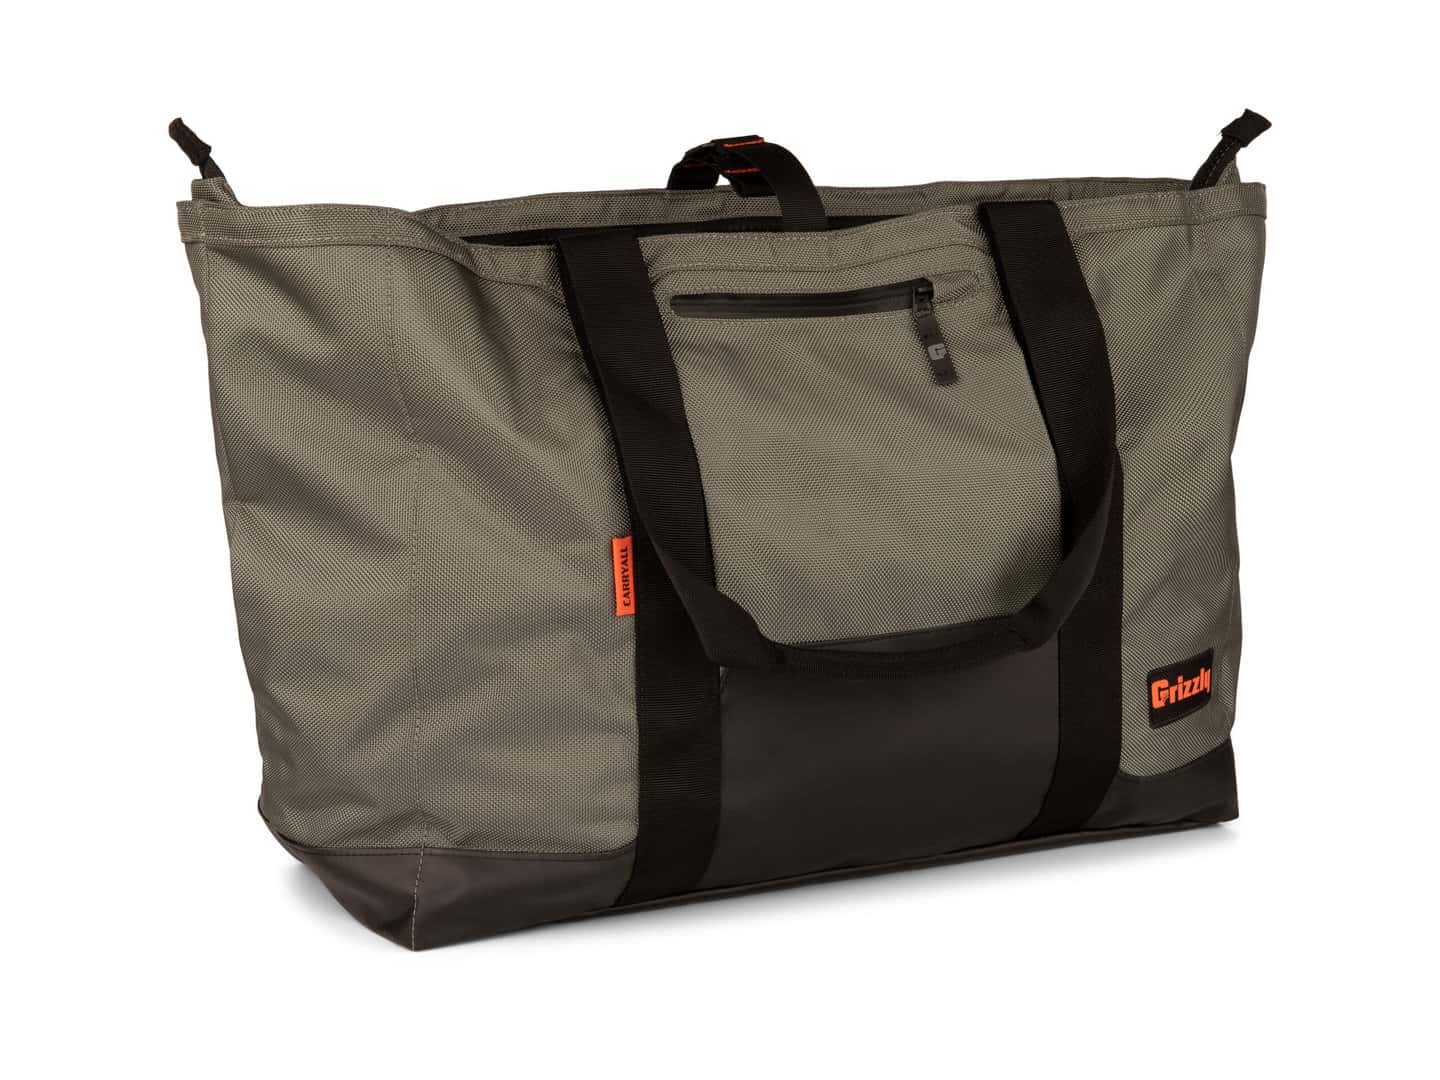 Grizzly Drifter CarryAll Bag